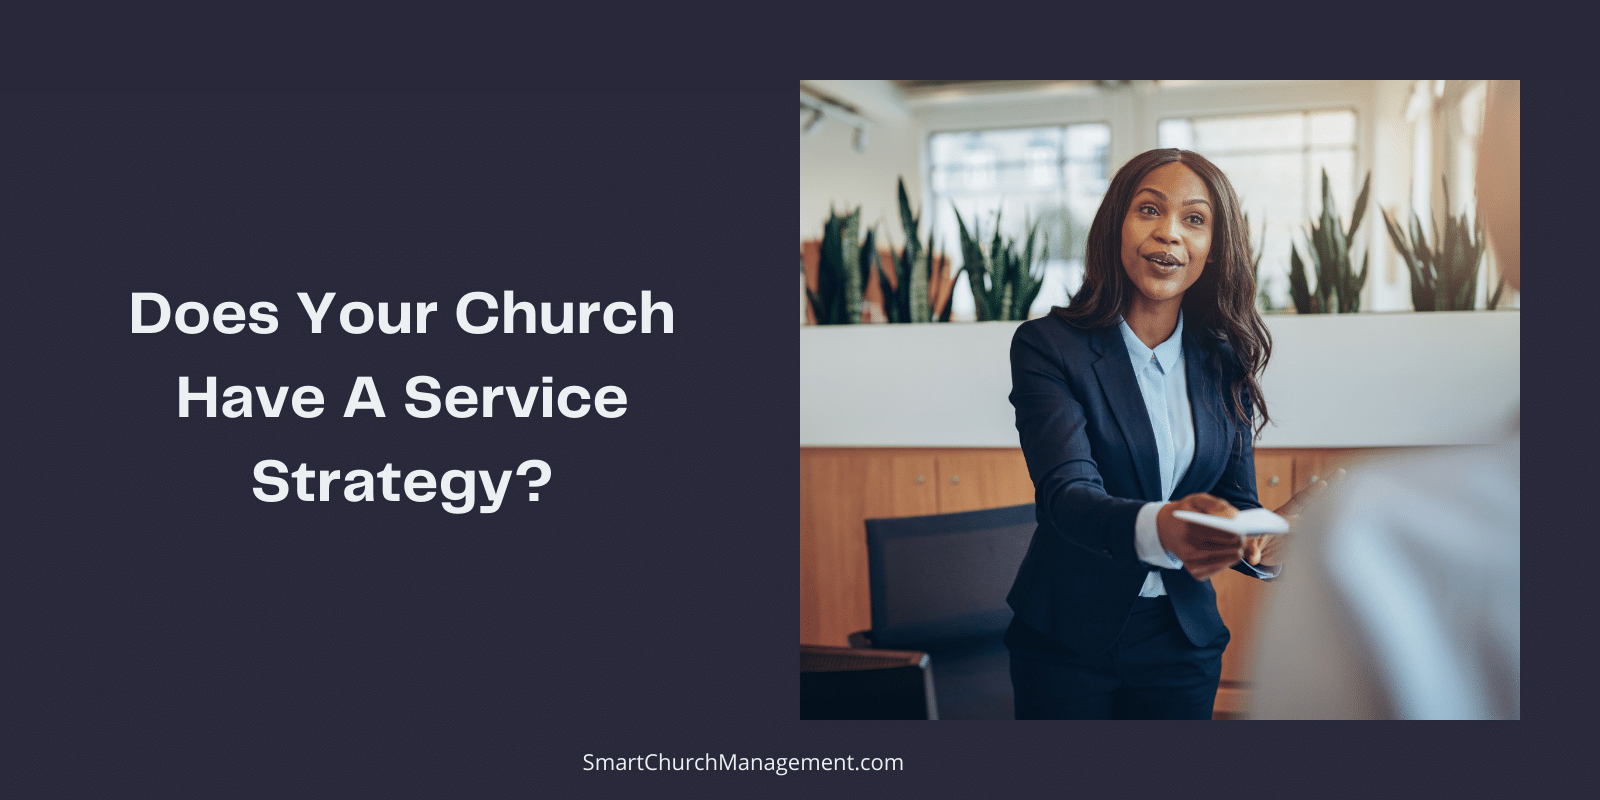 Does a church need a service strategy